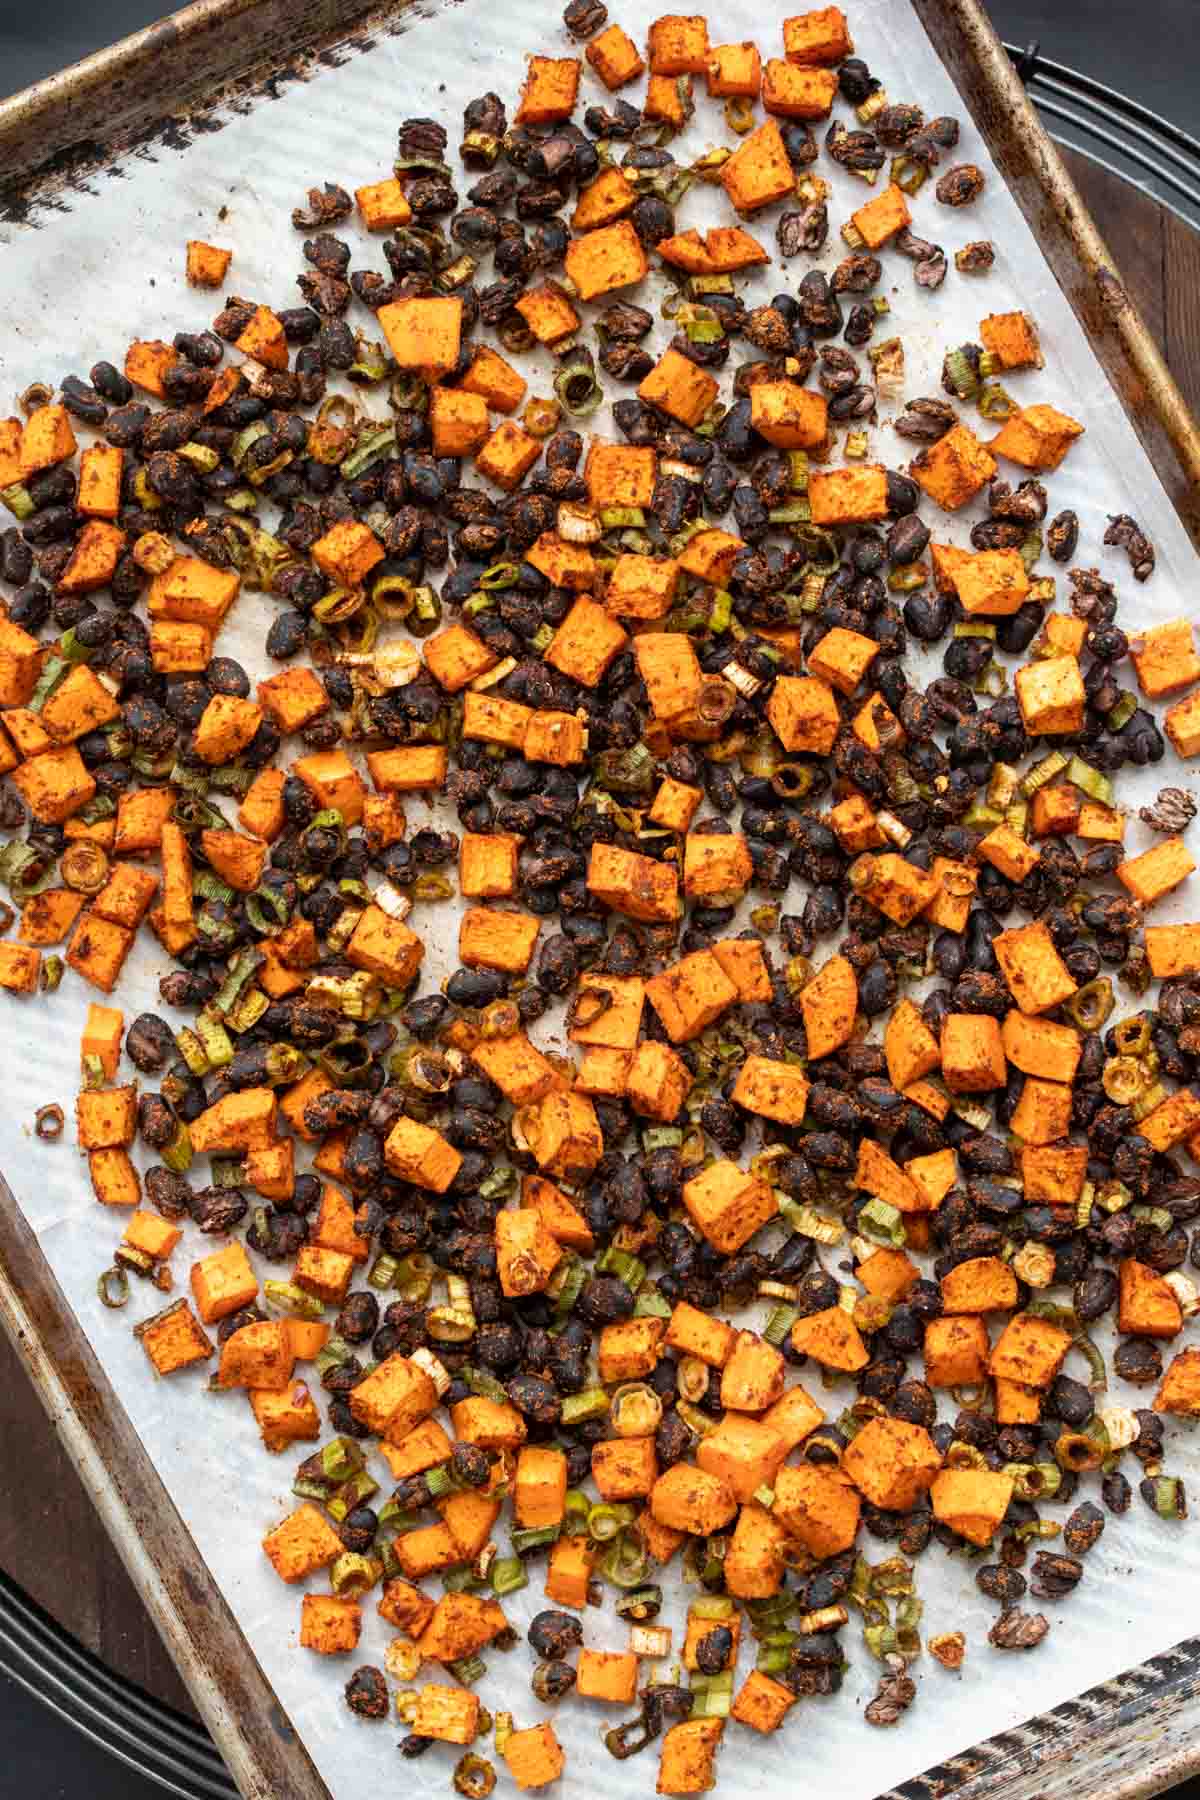 A sheet pan with parchment paper and baked sweet potato pieces and black beans